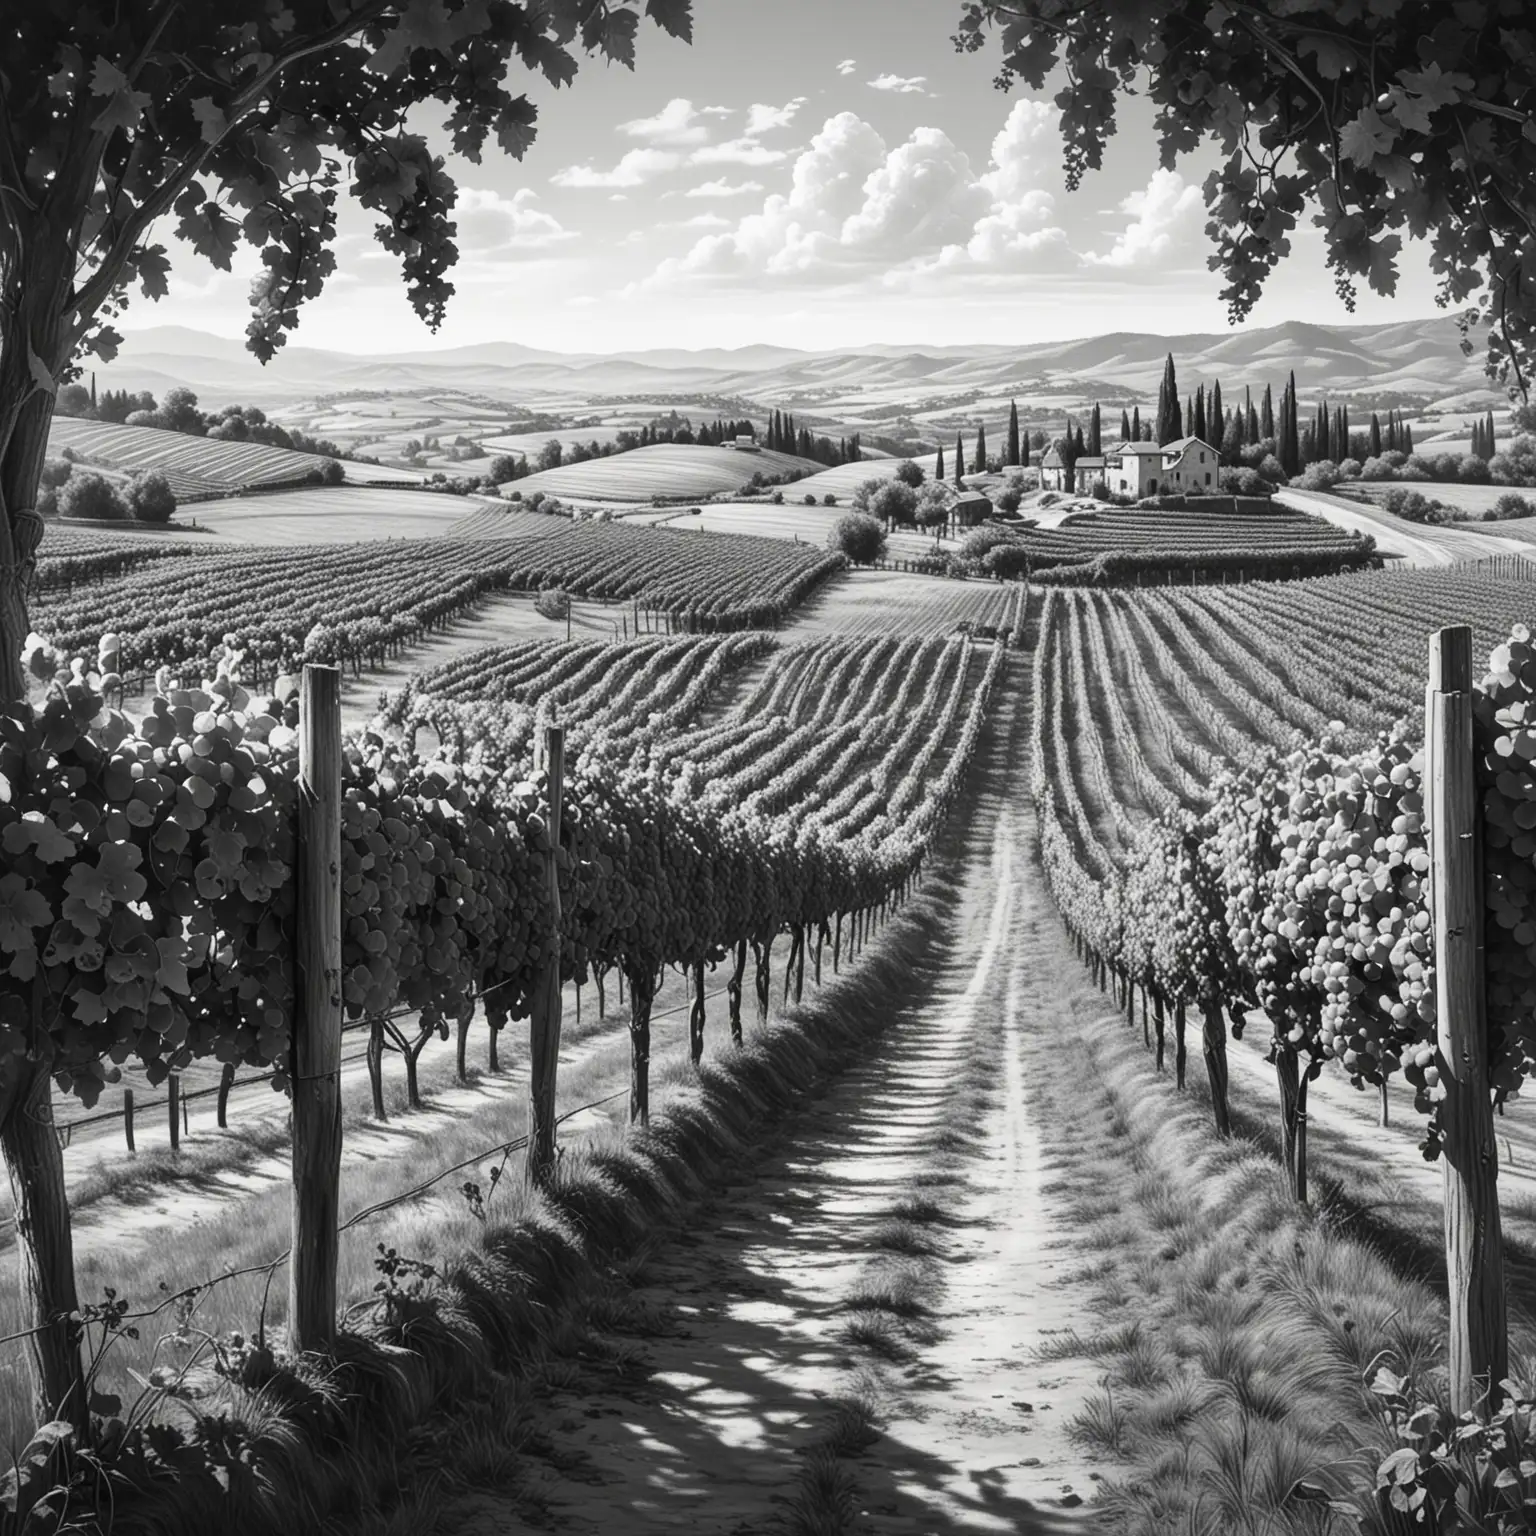 Vineyard Sketch Tranquil Landscape in Monochrome Pencil Drawing